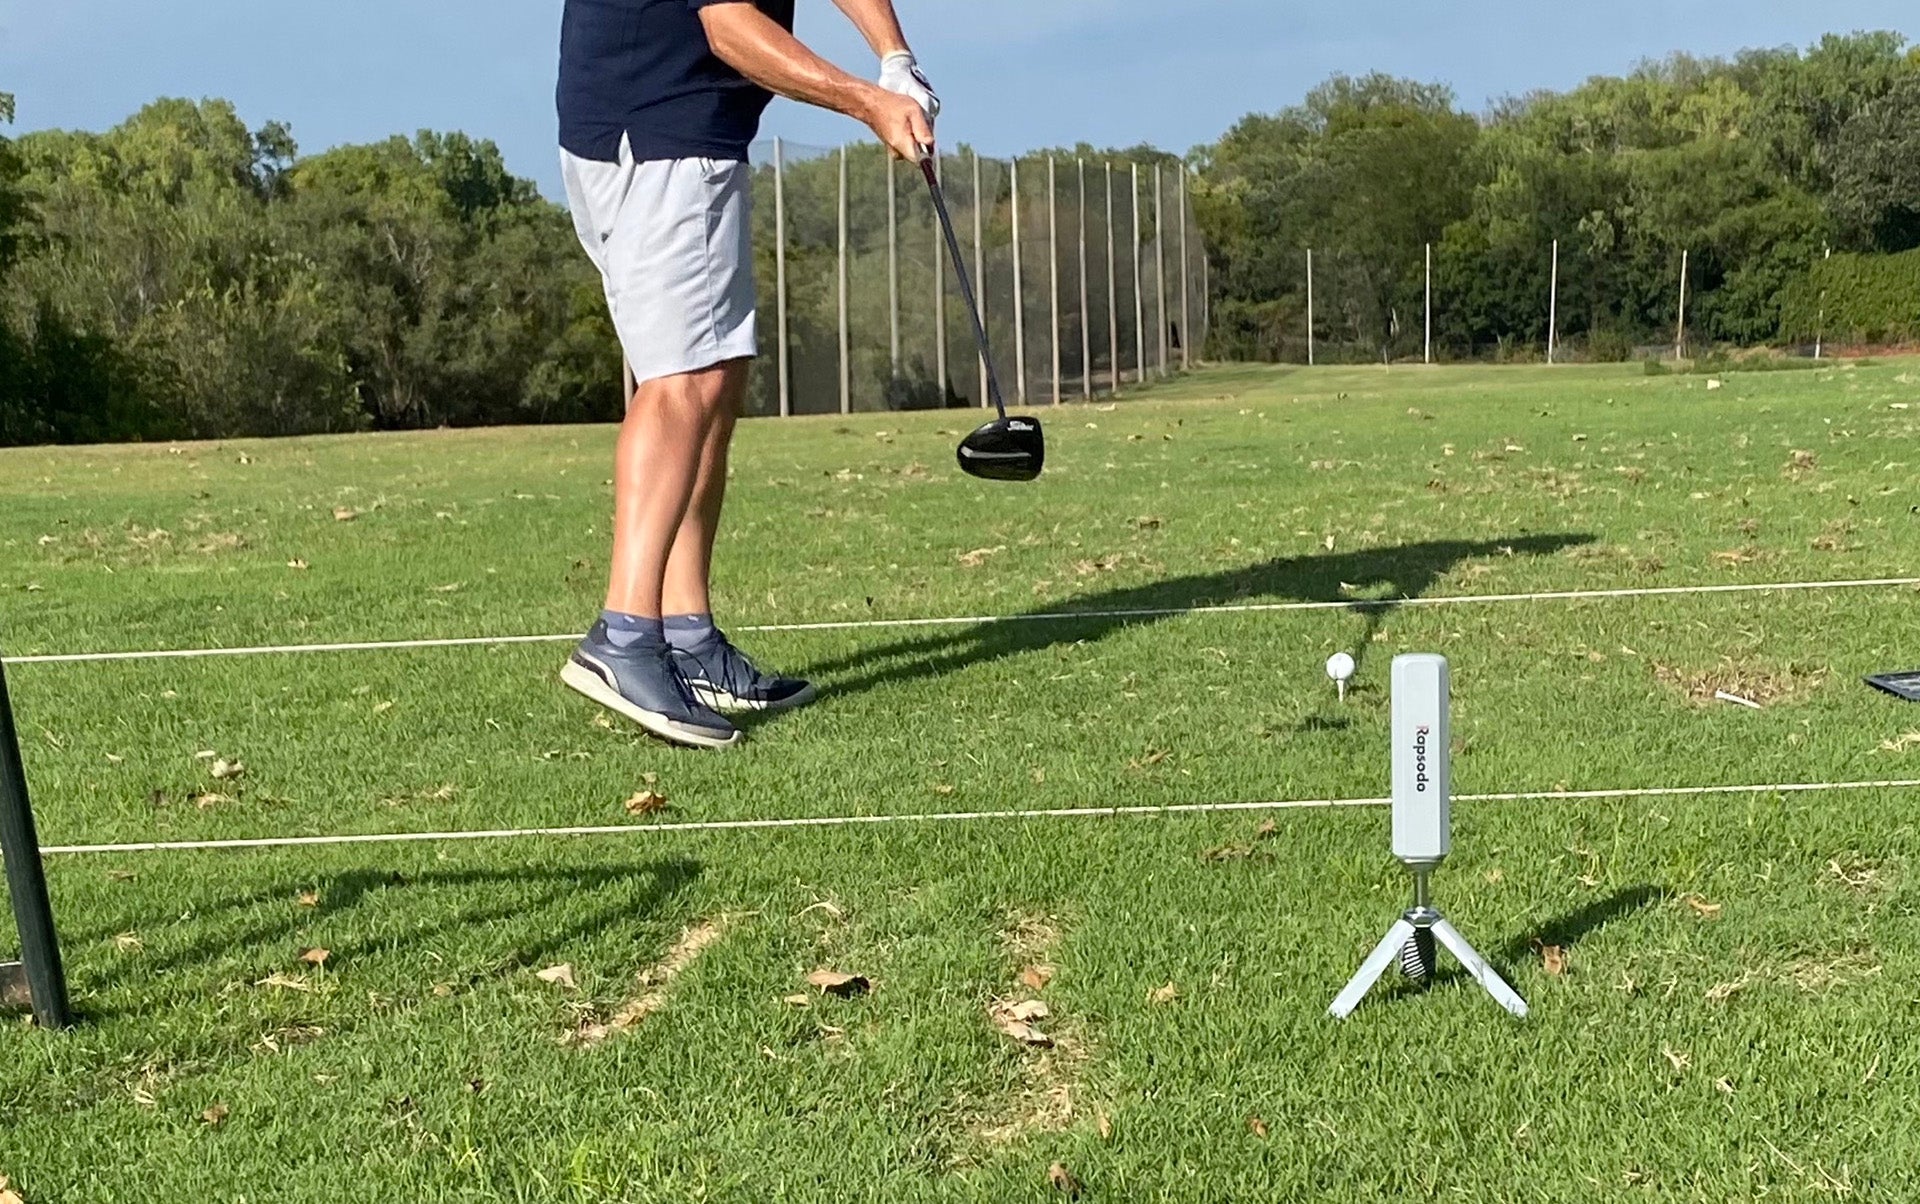 Marc's lower torso on the golf range in mid-swing in front of the Rapsodo MLM2PRO golf launch monitor